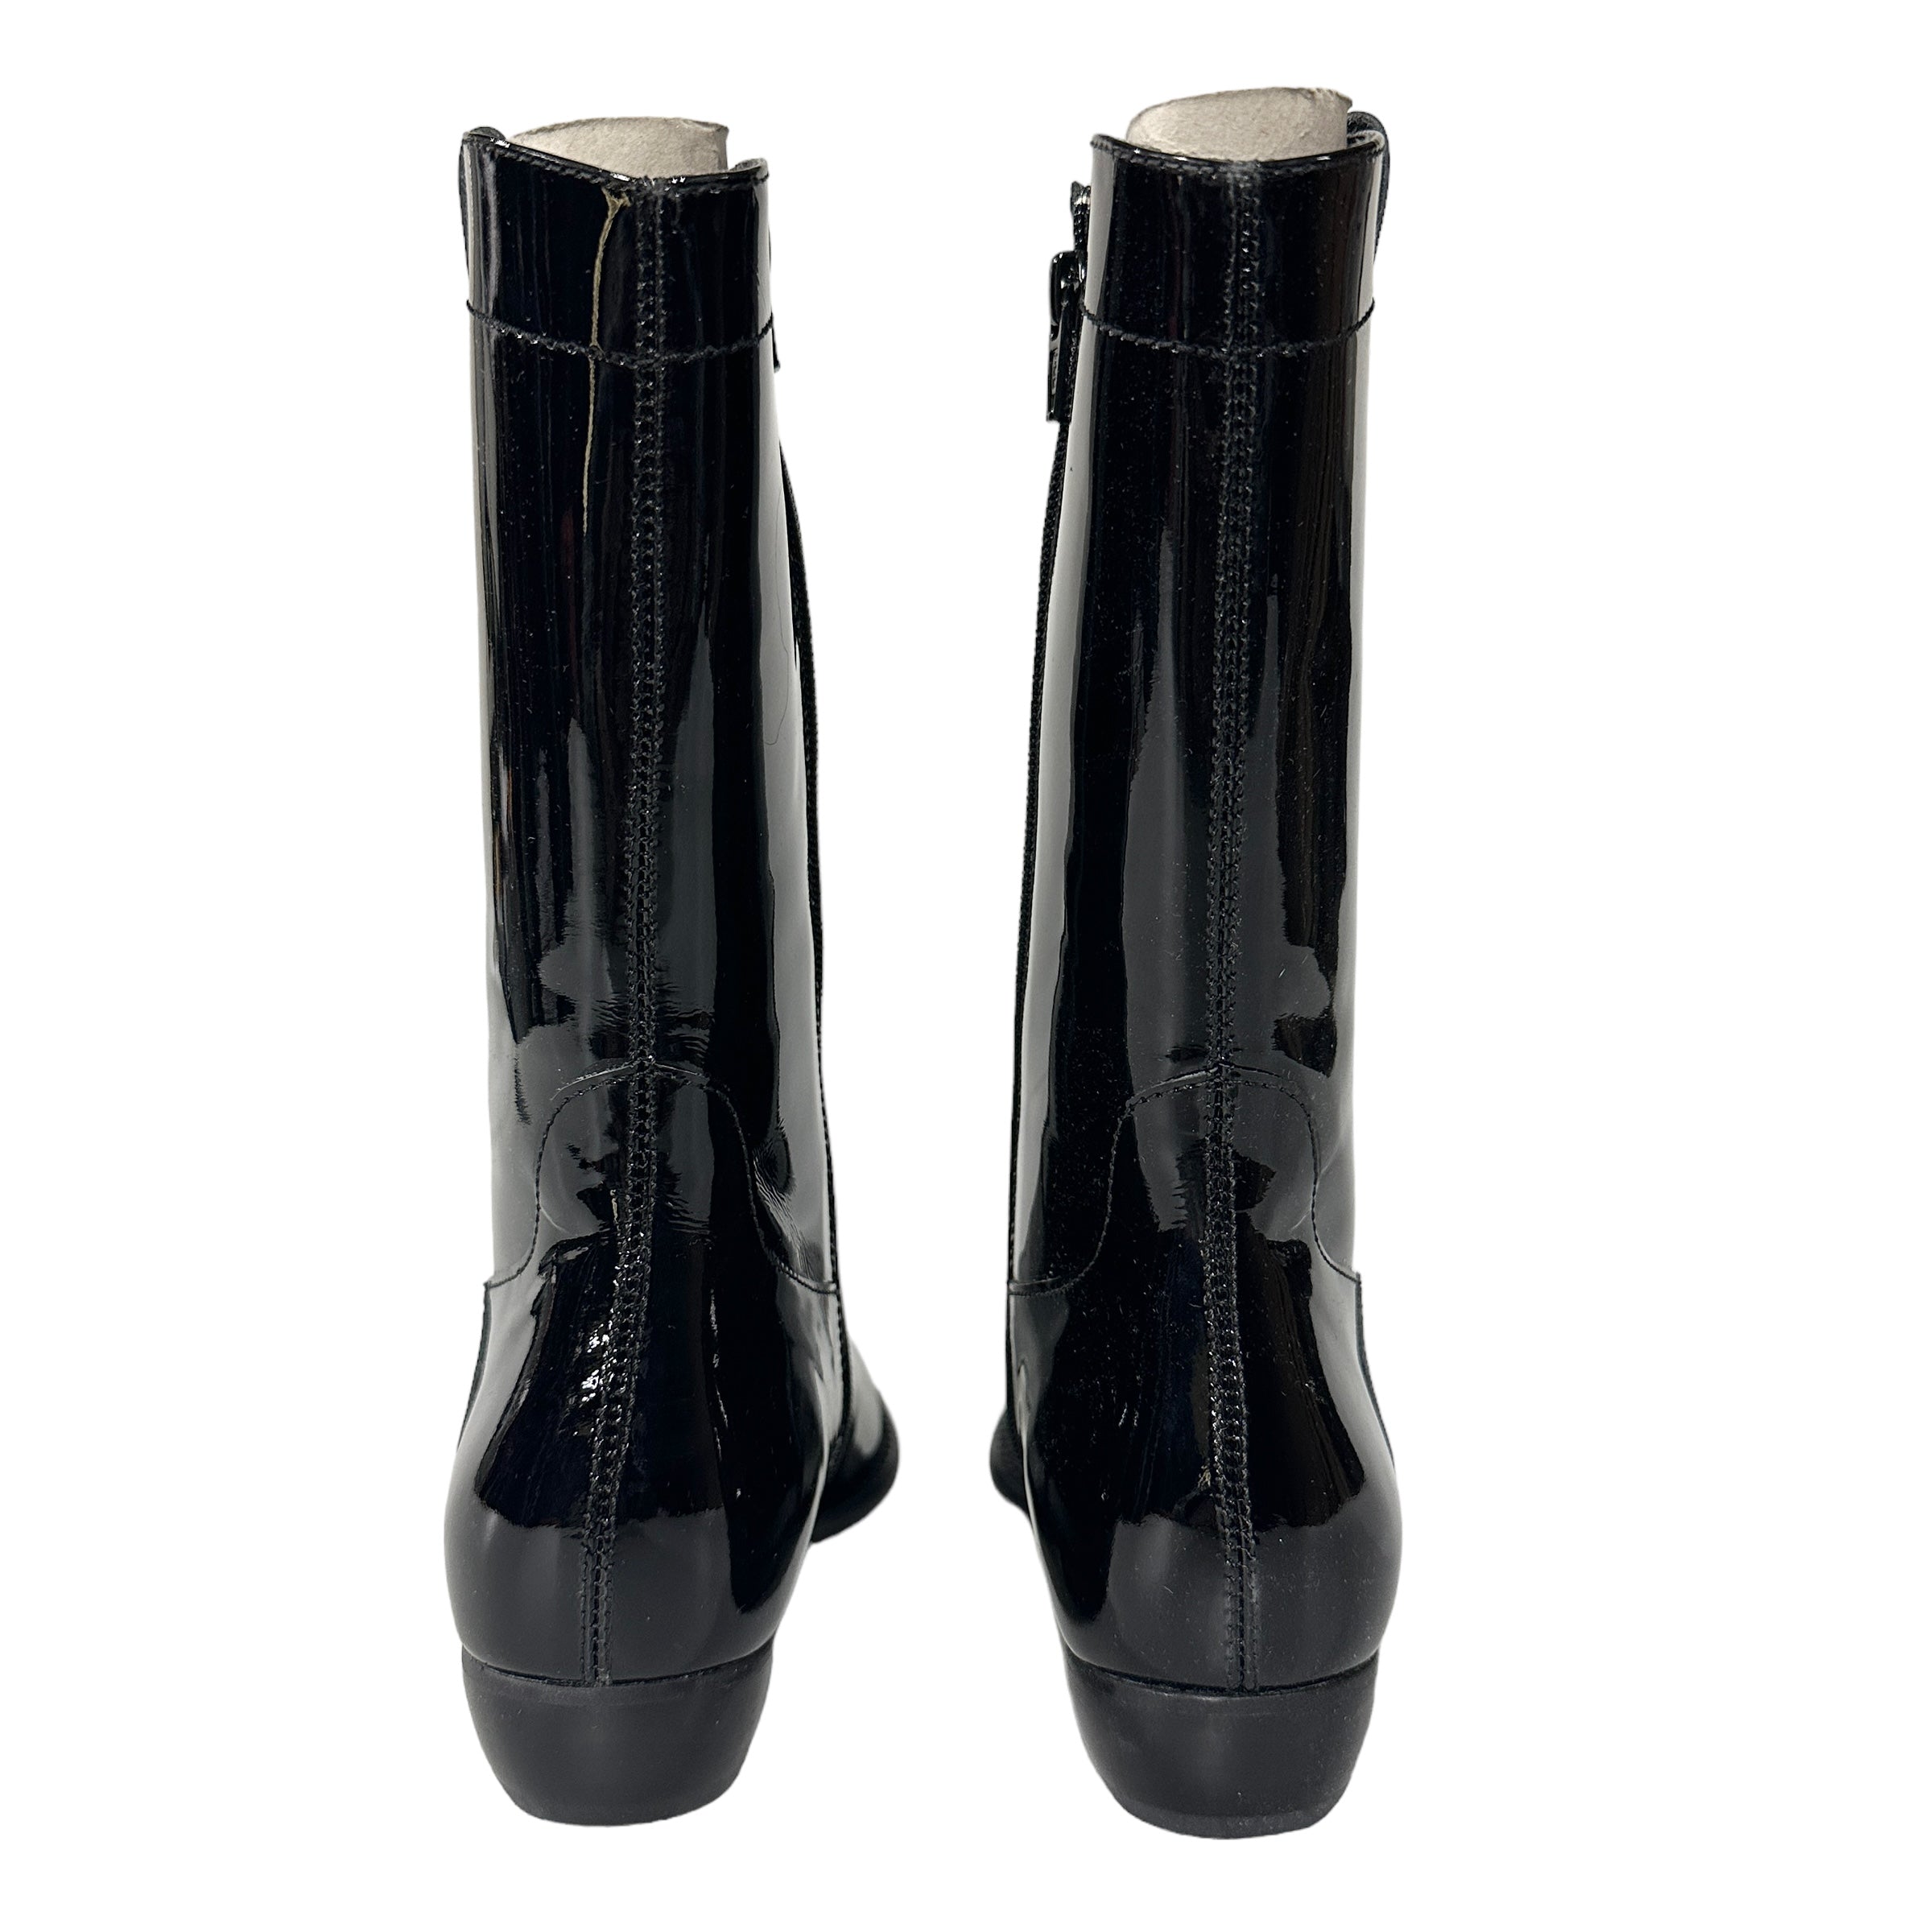 E8 BY MIISTA Patent leather boots / Black